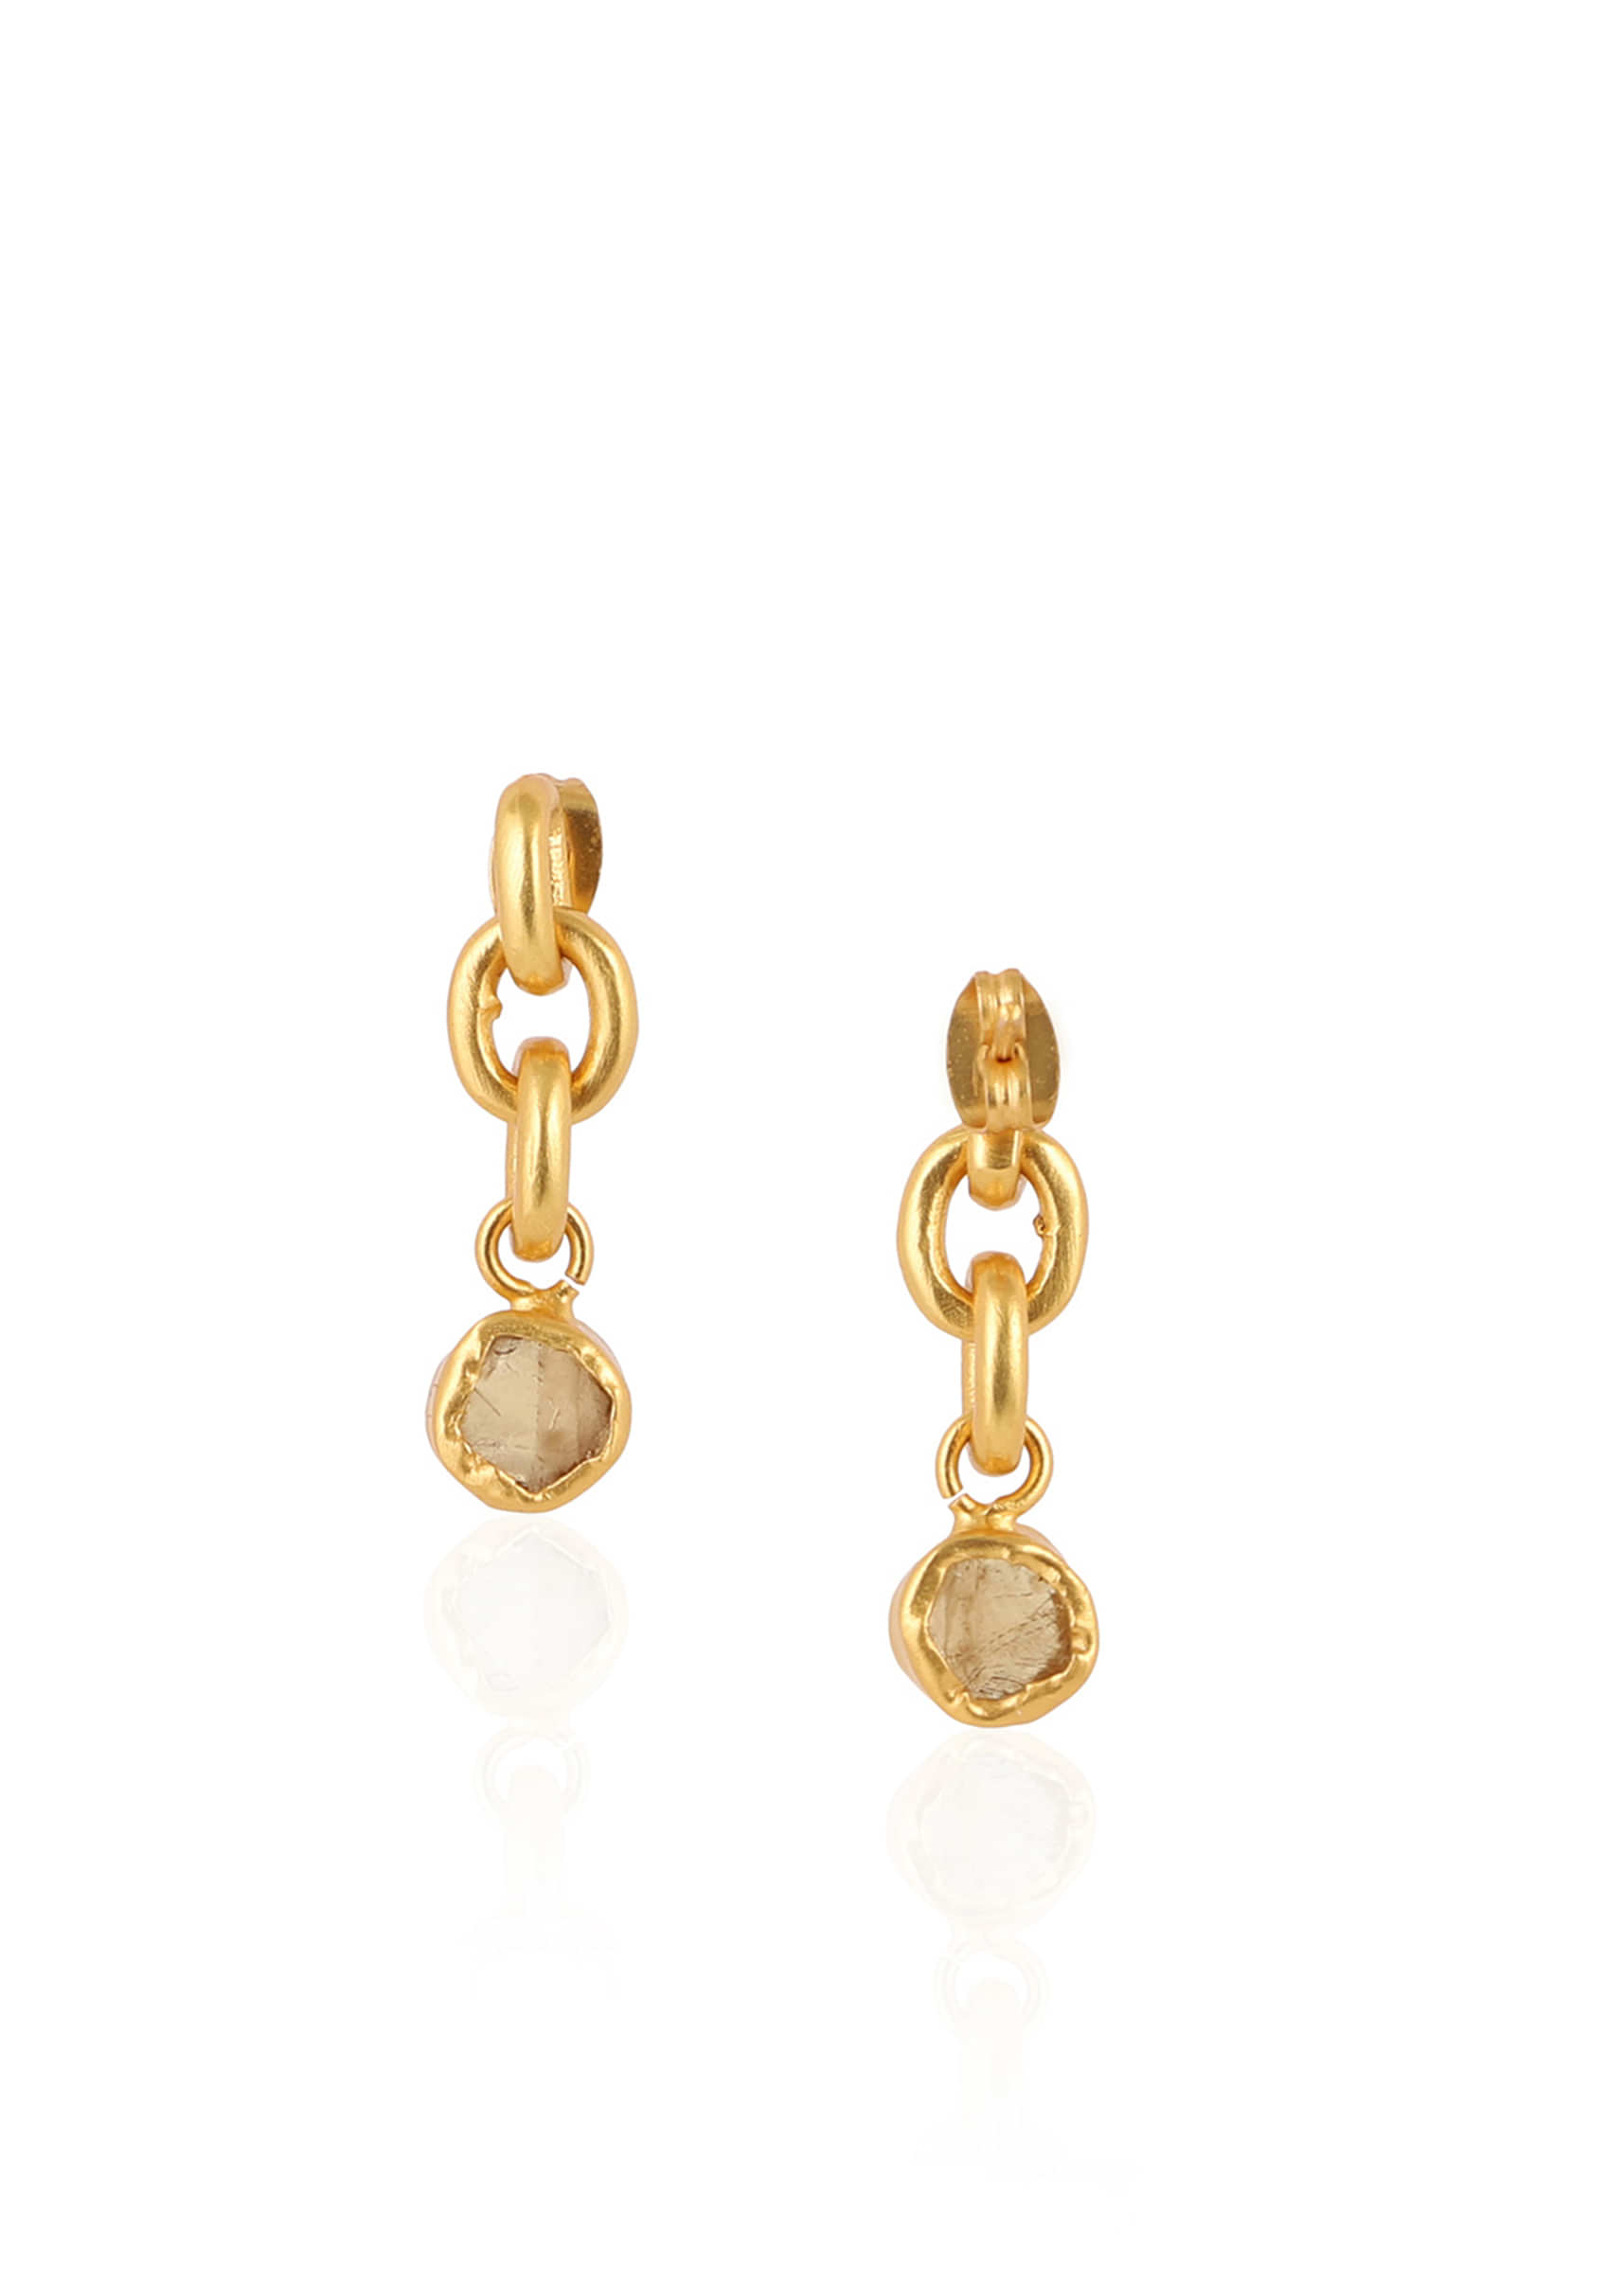 Gold Plated Earrings In A Chunky Link Chain Design With A Rough Citrine Stone By Zariin